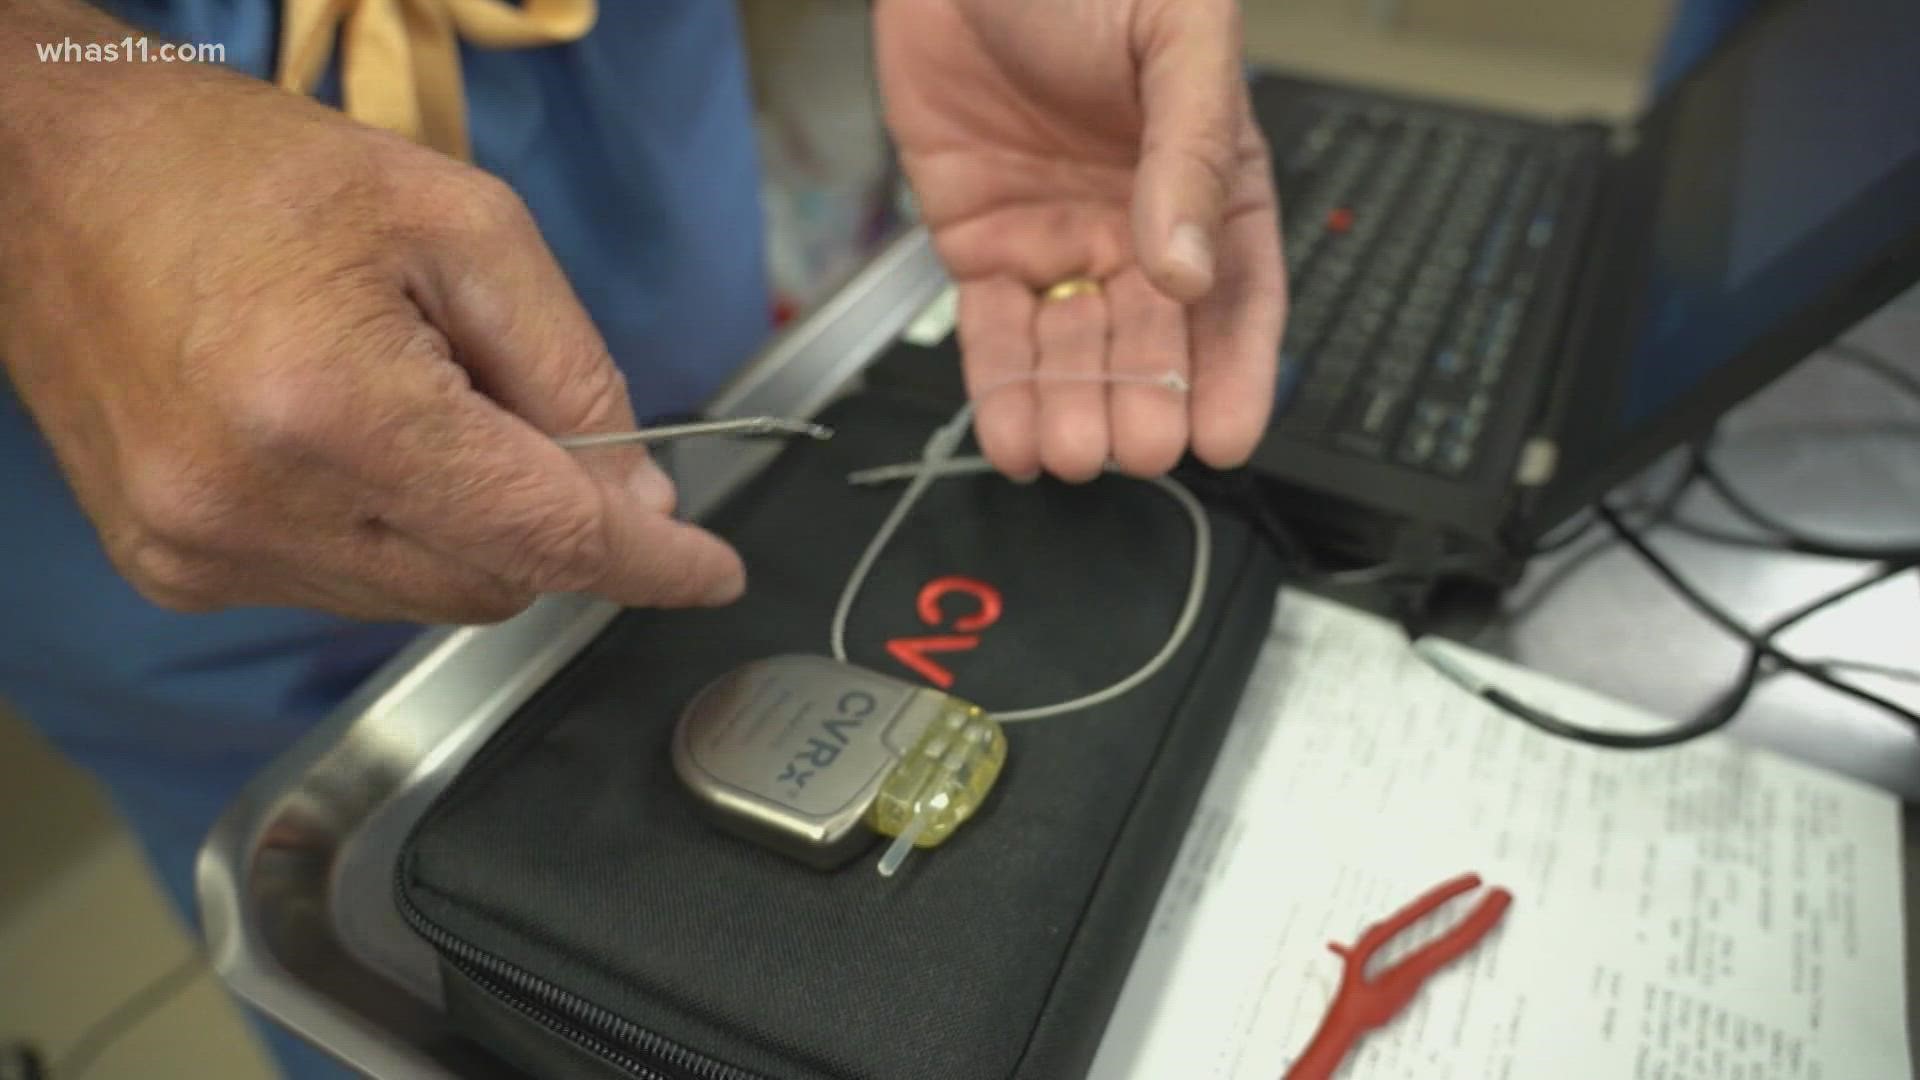 UofL Health is now the first in Kentucky to put in a device Barostim Neo that can help heart failure patients who don't respond to medications and therapies.